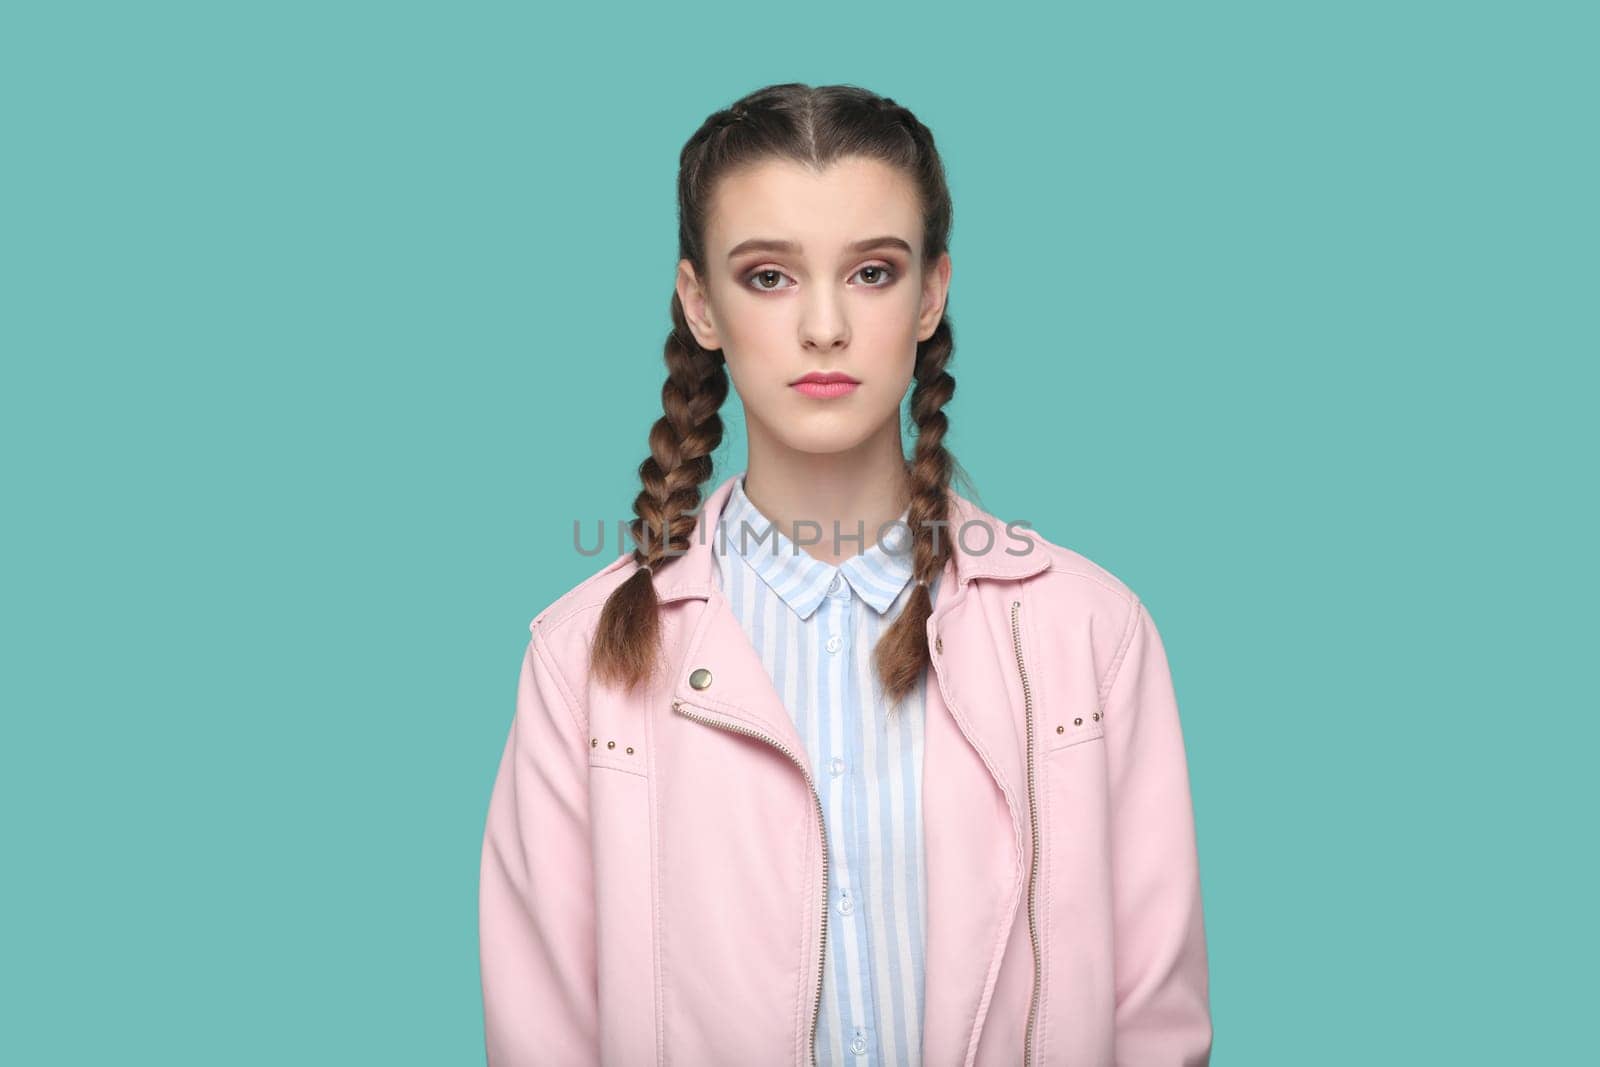 Serious strict teenager girl with braids wearing pink jacket looking at camera with bossy expression by Khosro1